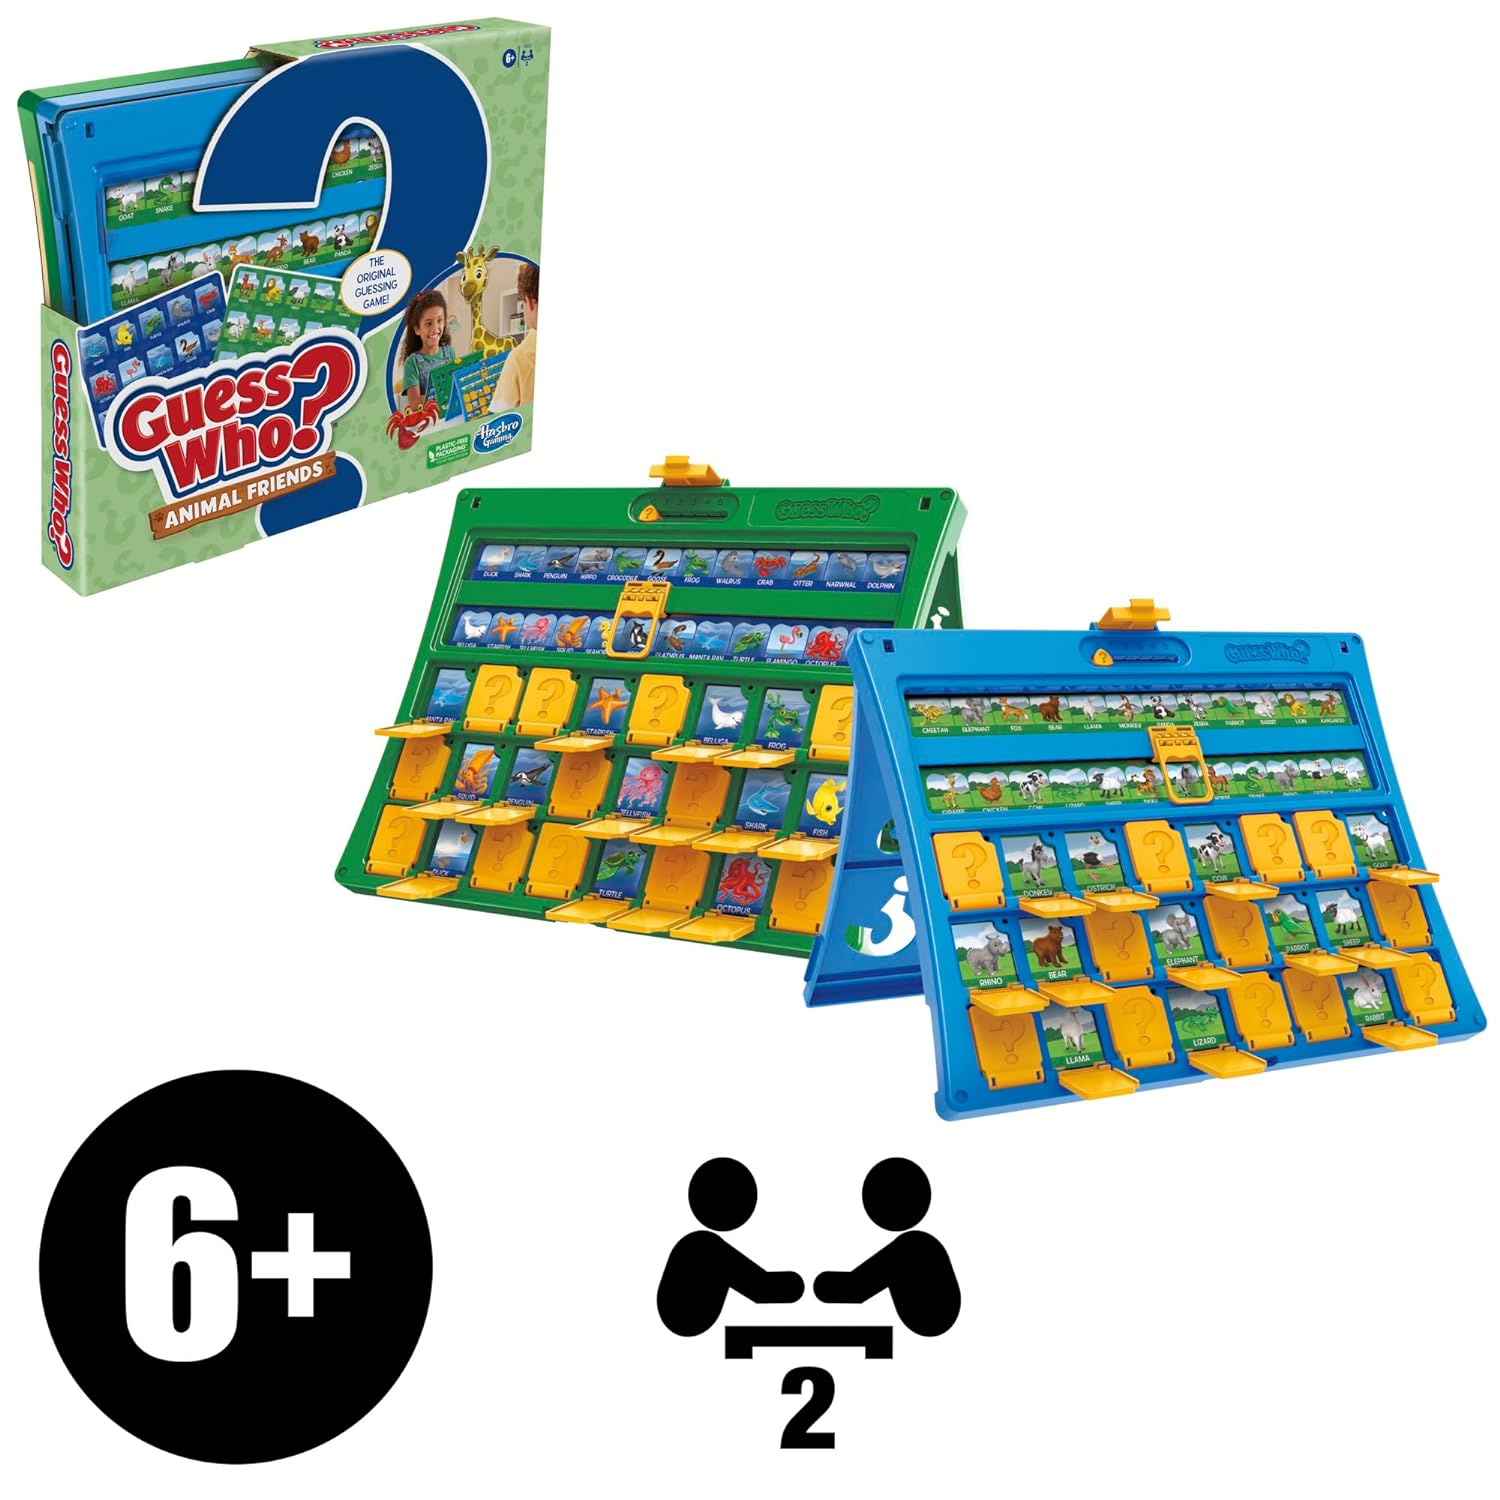 Guess Who? Animal Friends Board Game for Kids Ages 6+, Guess Who? Game with Animals, Includes 2 Double-Sided Animal Sheets